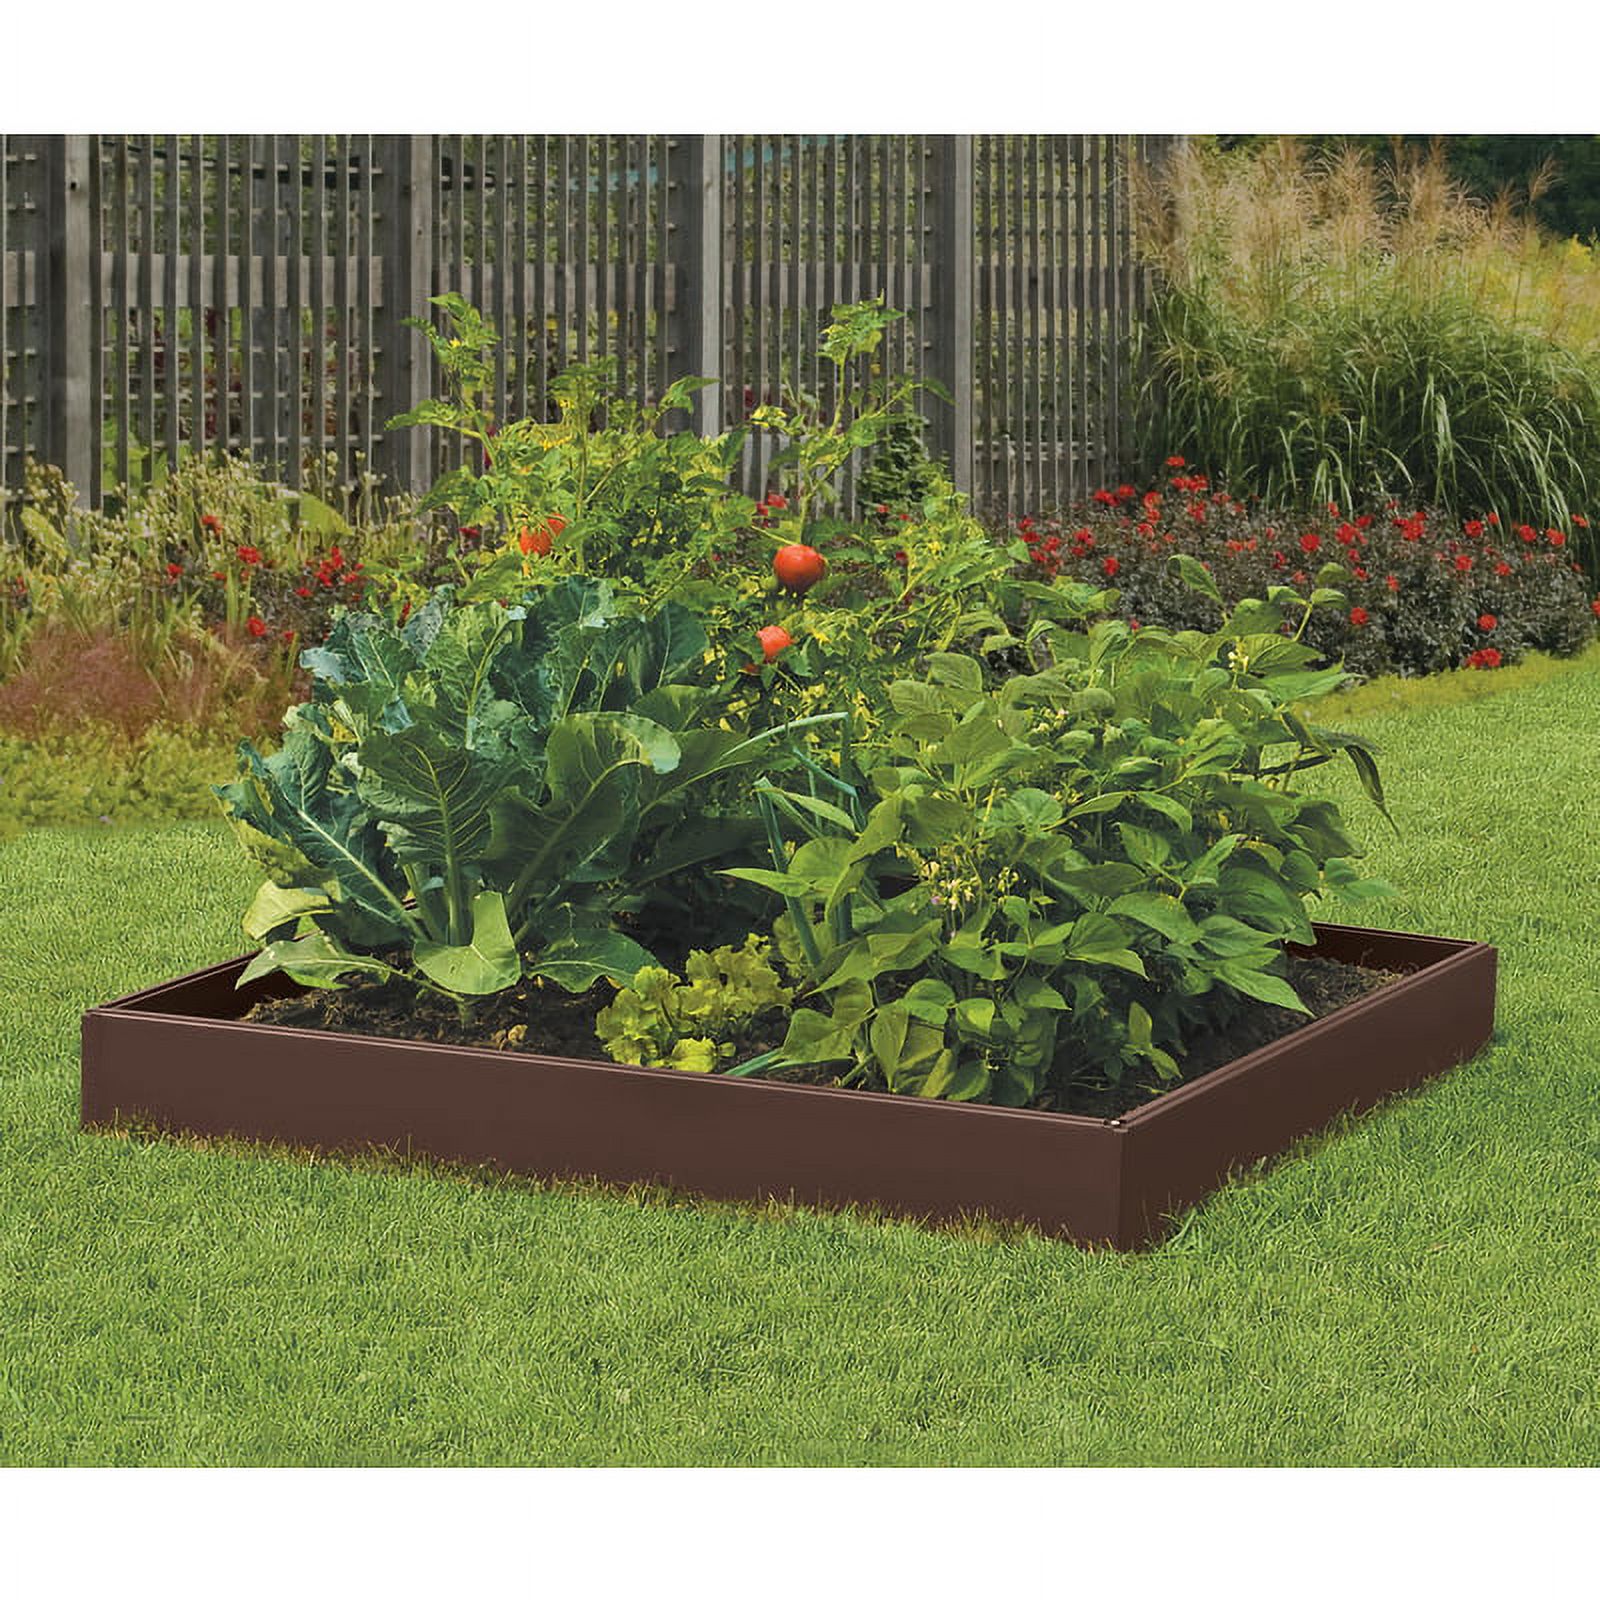 Suncast 5.5 in. H X 46 in. W X 46 in. D Resin Elevated Garden Bed Kit Brown - image 2 of 2